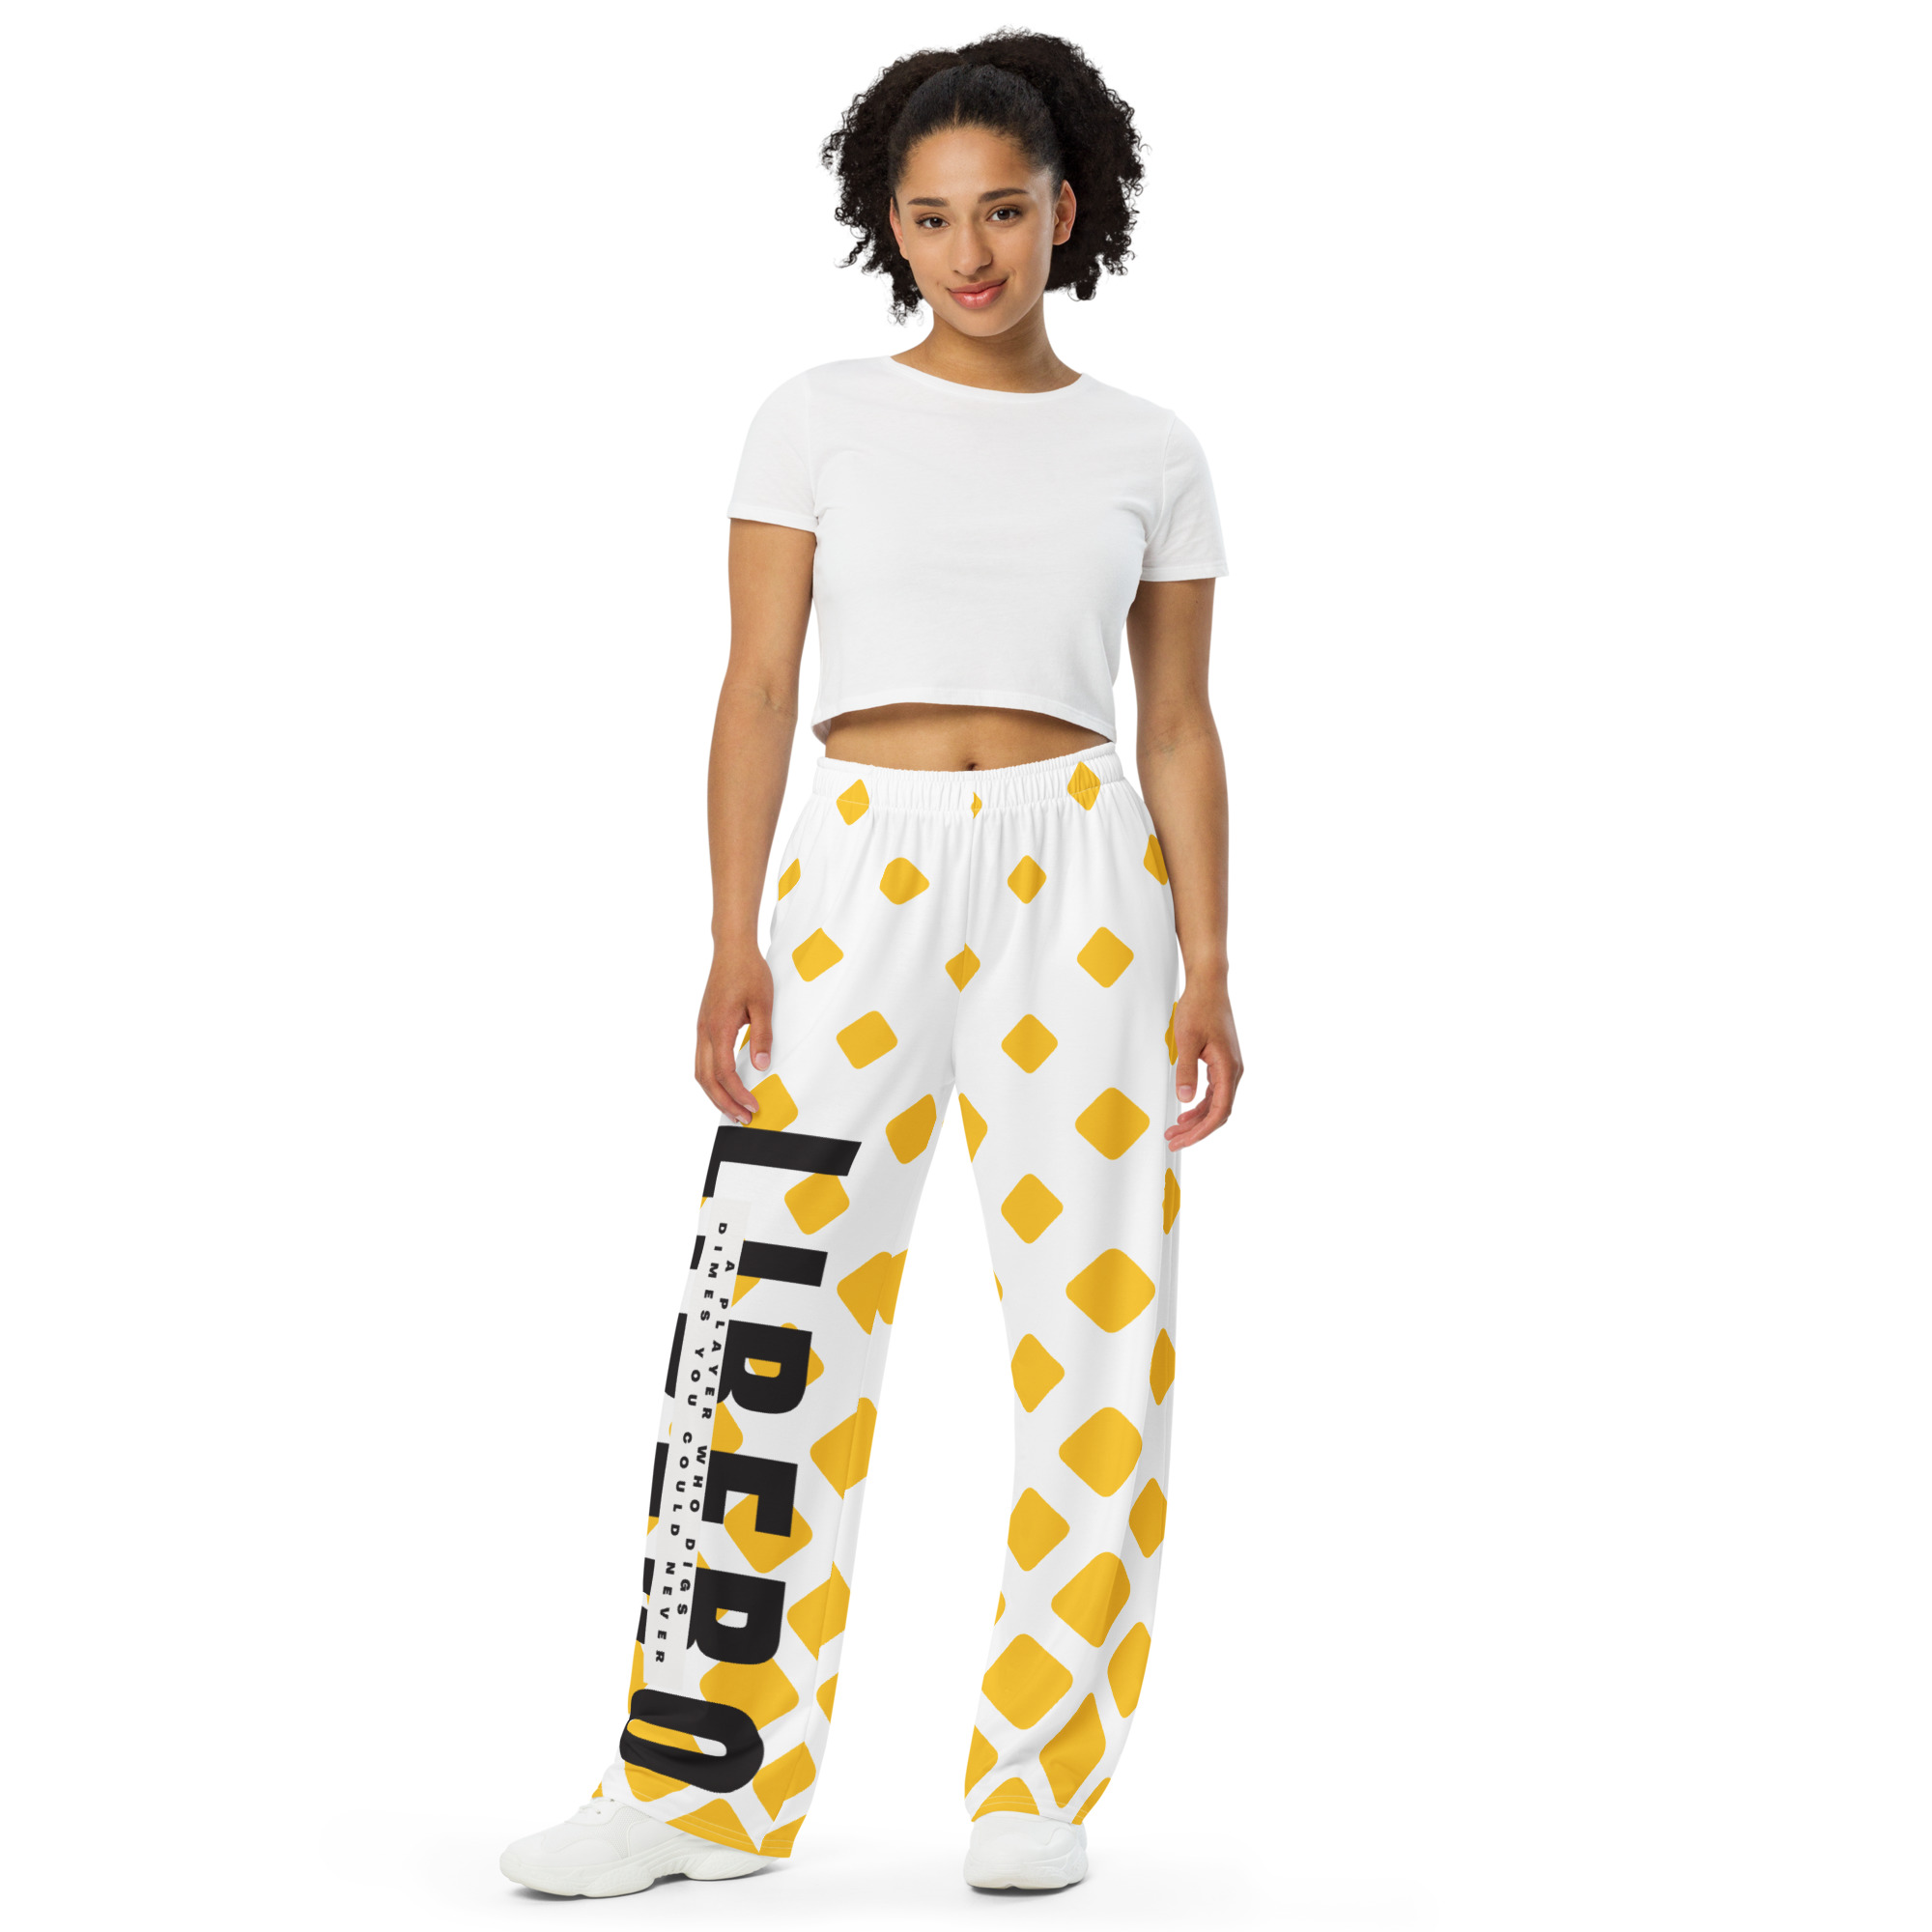 Check out what's 'new' and 'what's next' in cute pre-workout and post workout volleyball streetwear with lots of colorful mix n match patterns with fabrics that have a functional feel ...perfect for post practice comfort while fearlessly fashionable for a playa with flava, if that's you then these 'fits' are for you!
Pajama-Pants-yellowdiamonds-Liber